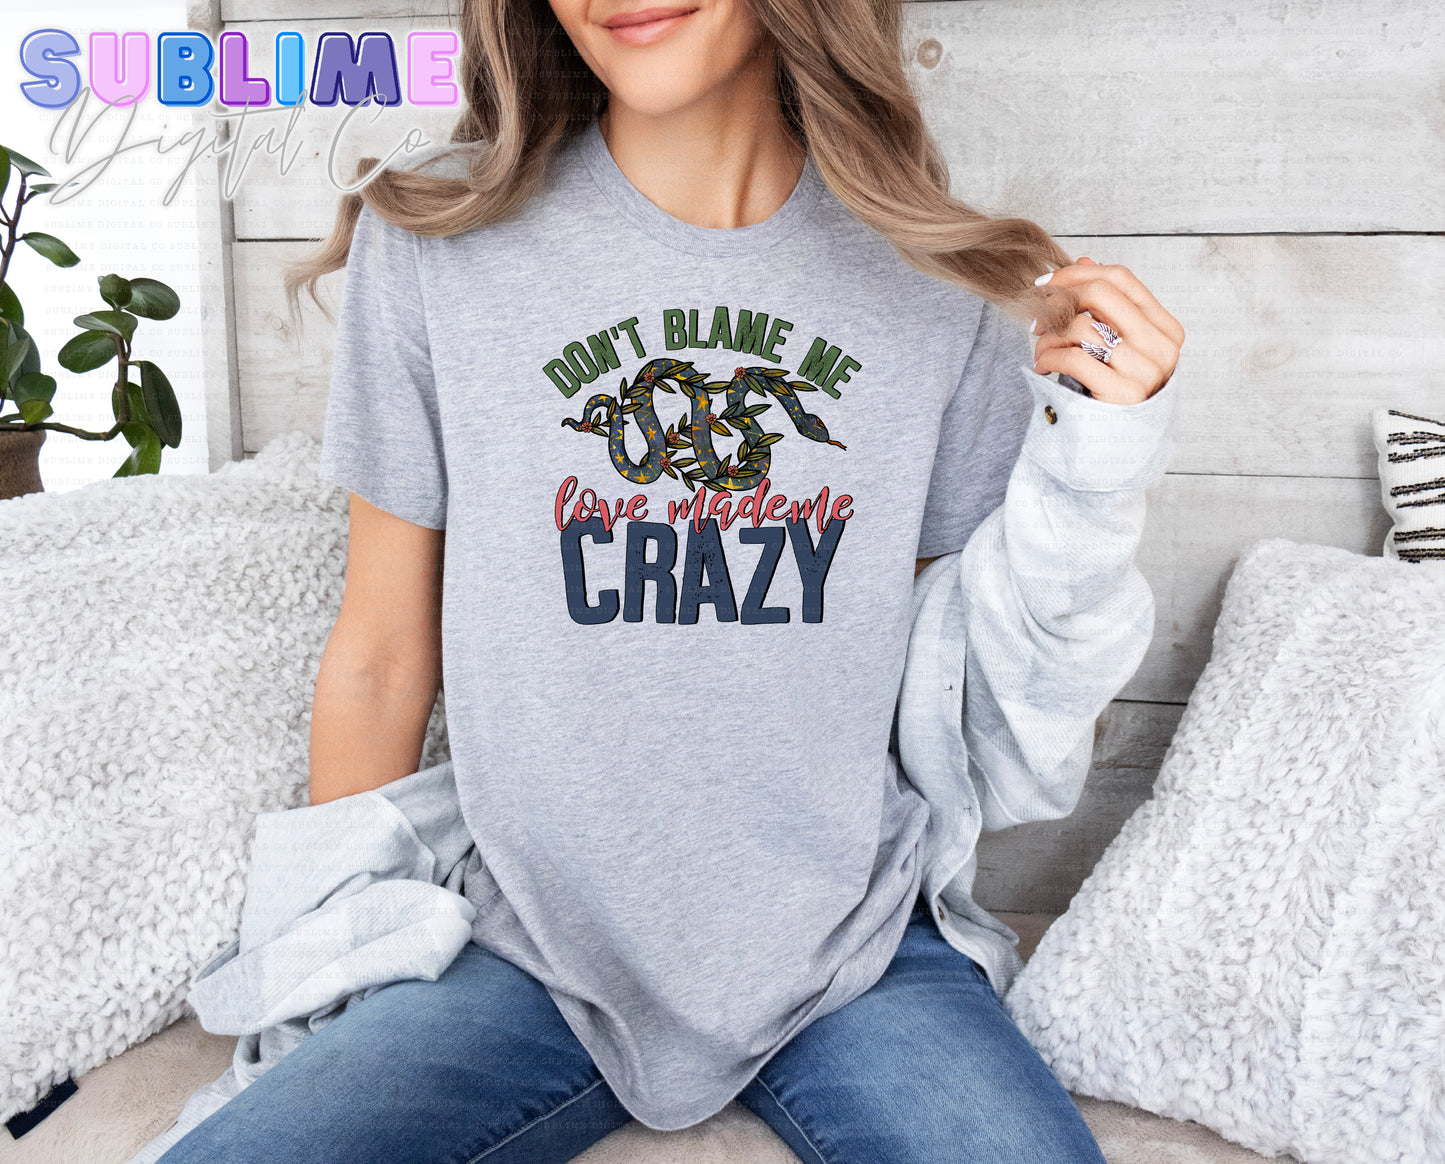 Made Me Crazy • Adult Apparel • Made to Order • TAT: Up To 21 Days